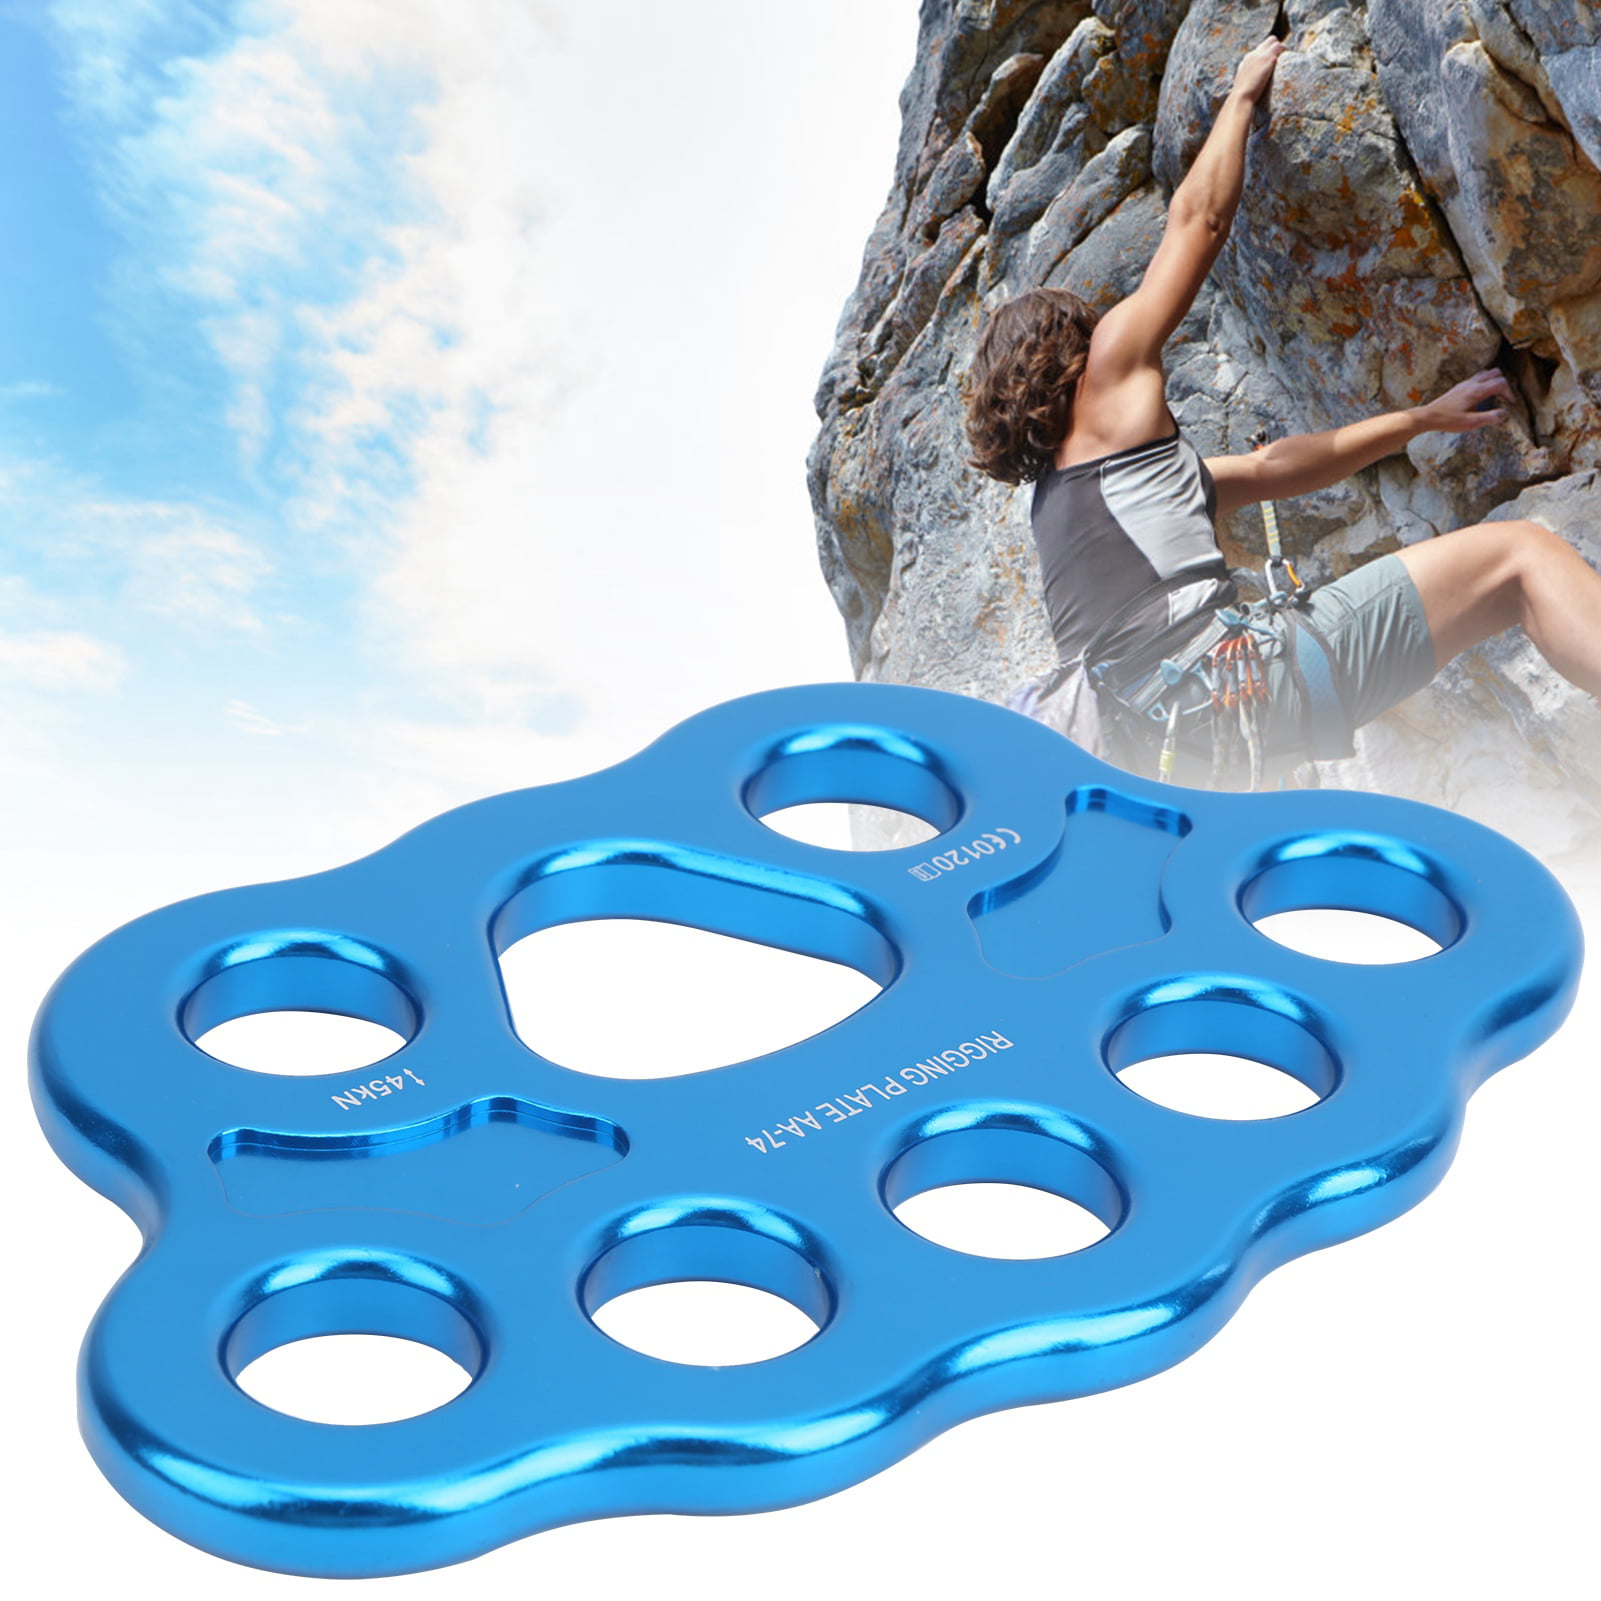 Details about   Rigging Plate 16x10cm 1 PCS Climbing Anchor Connector 45KN Safe High Strength 